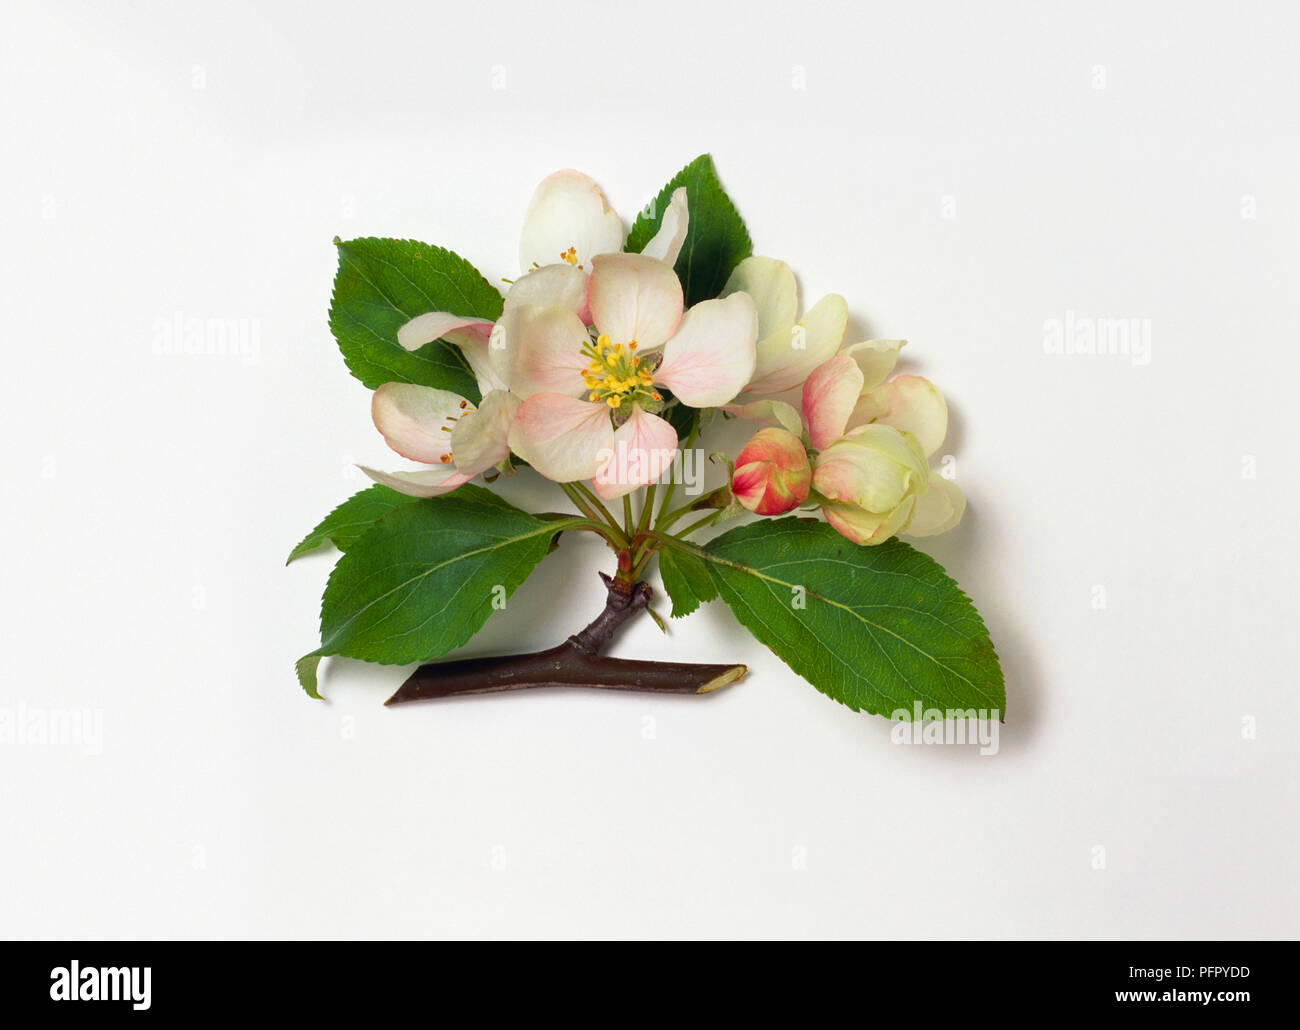 Malus 'Red Jade' (Crab apple tree) stem with leaves and flowers Stock Photo